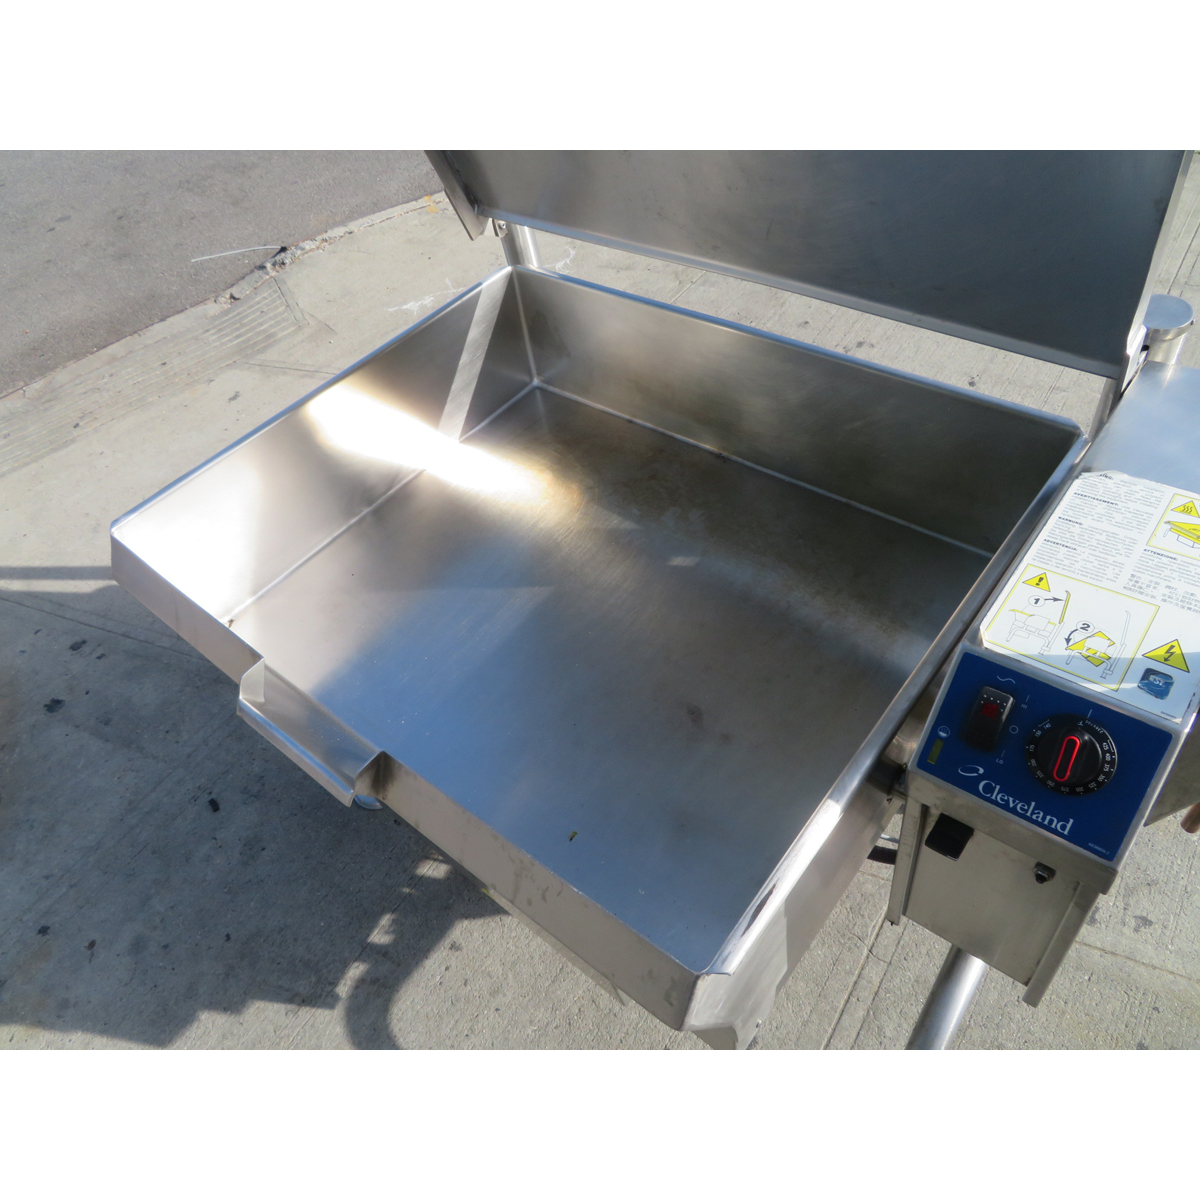 Cleveland SGL-40-T1 40 Gal. Gas Braising Pan Power Tilt Skillet, Used Excellent Condition image 2